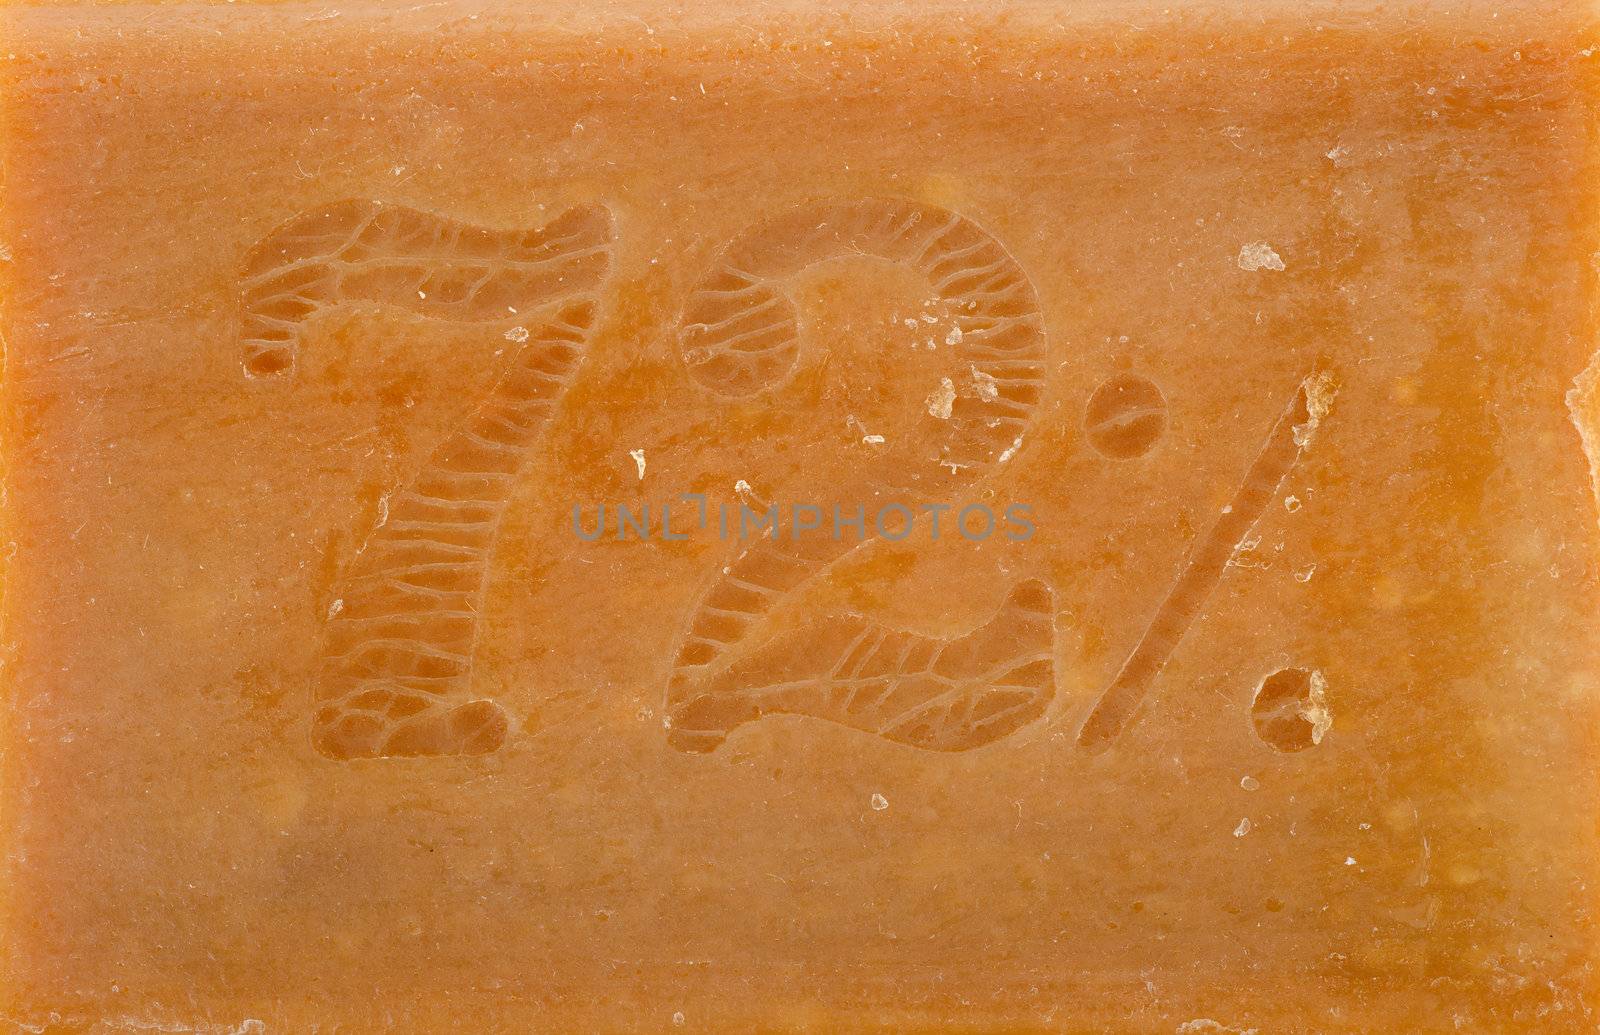 The background of brown soap